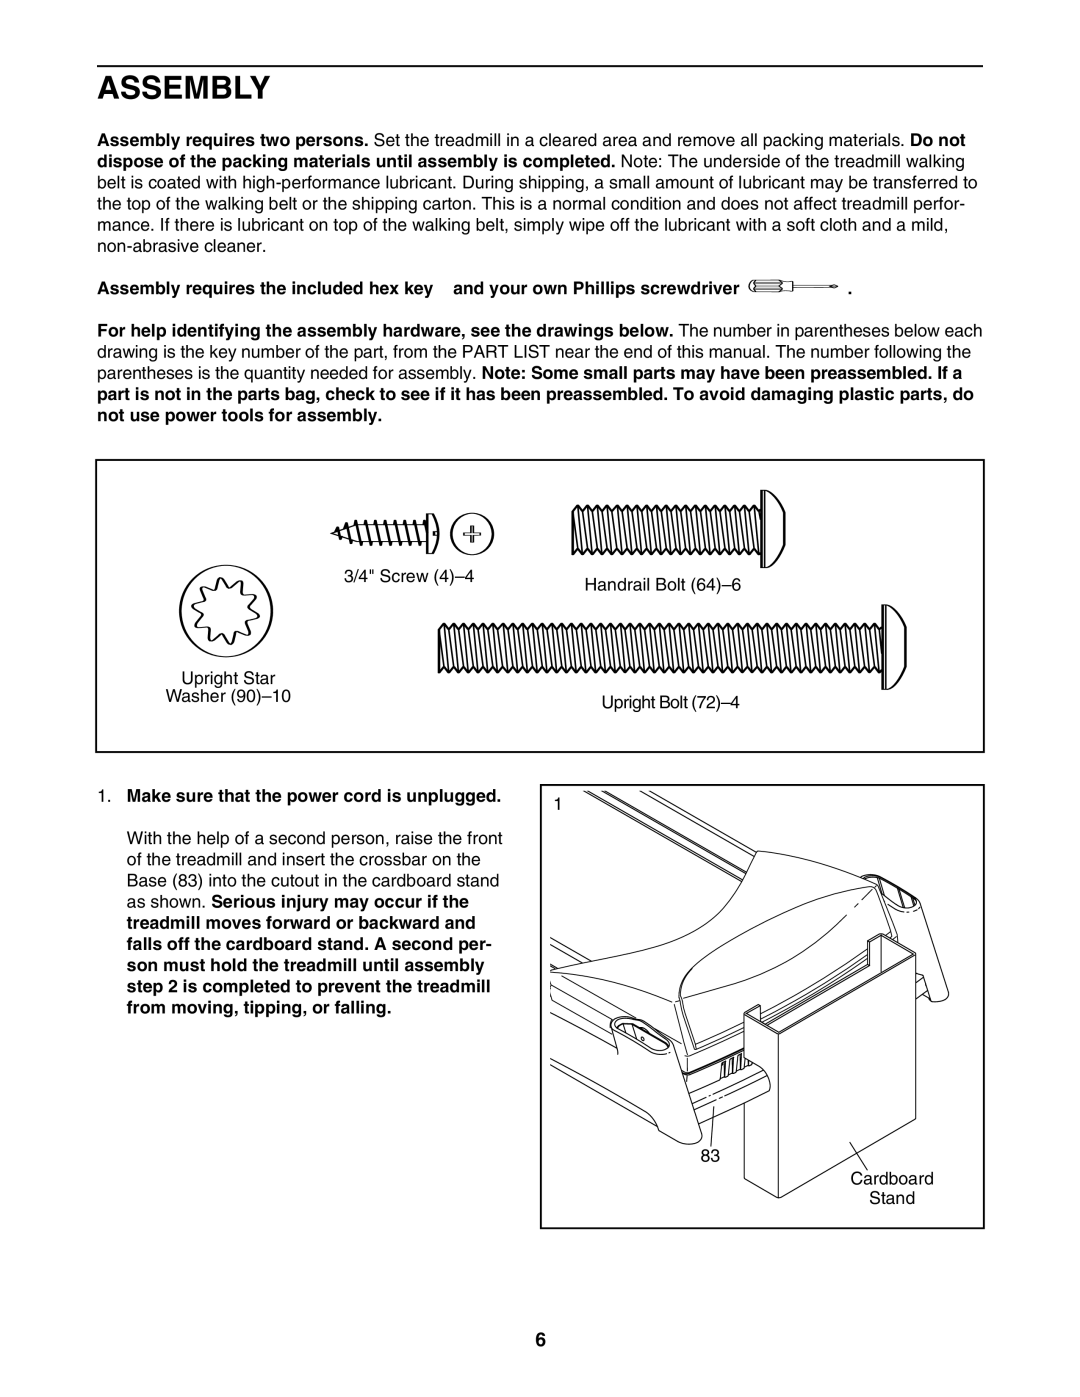 NordicTrack NTL19007.0 user manual Assembly, Make sure that the power cord is unplugged 